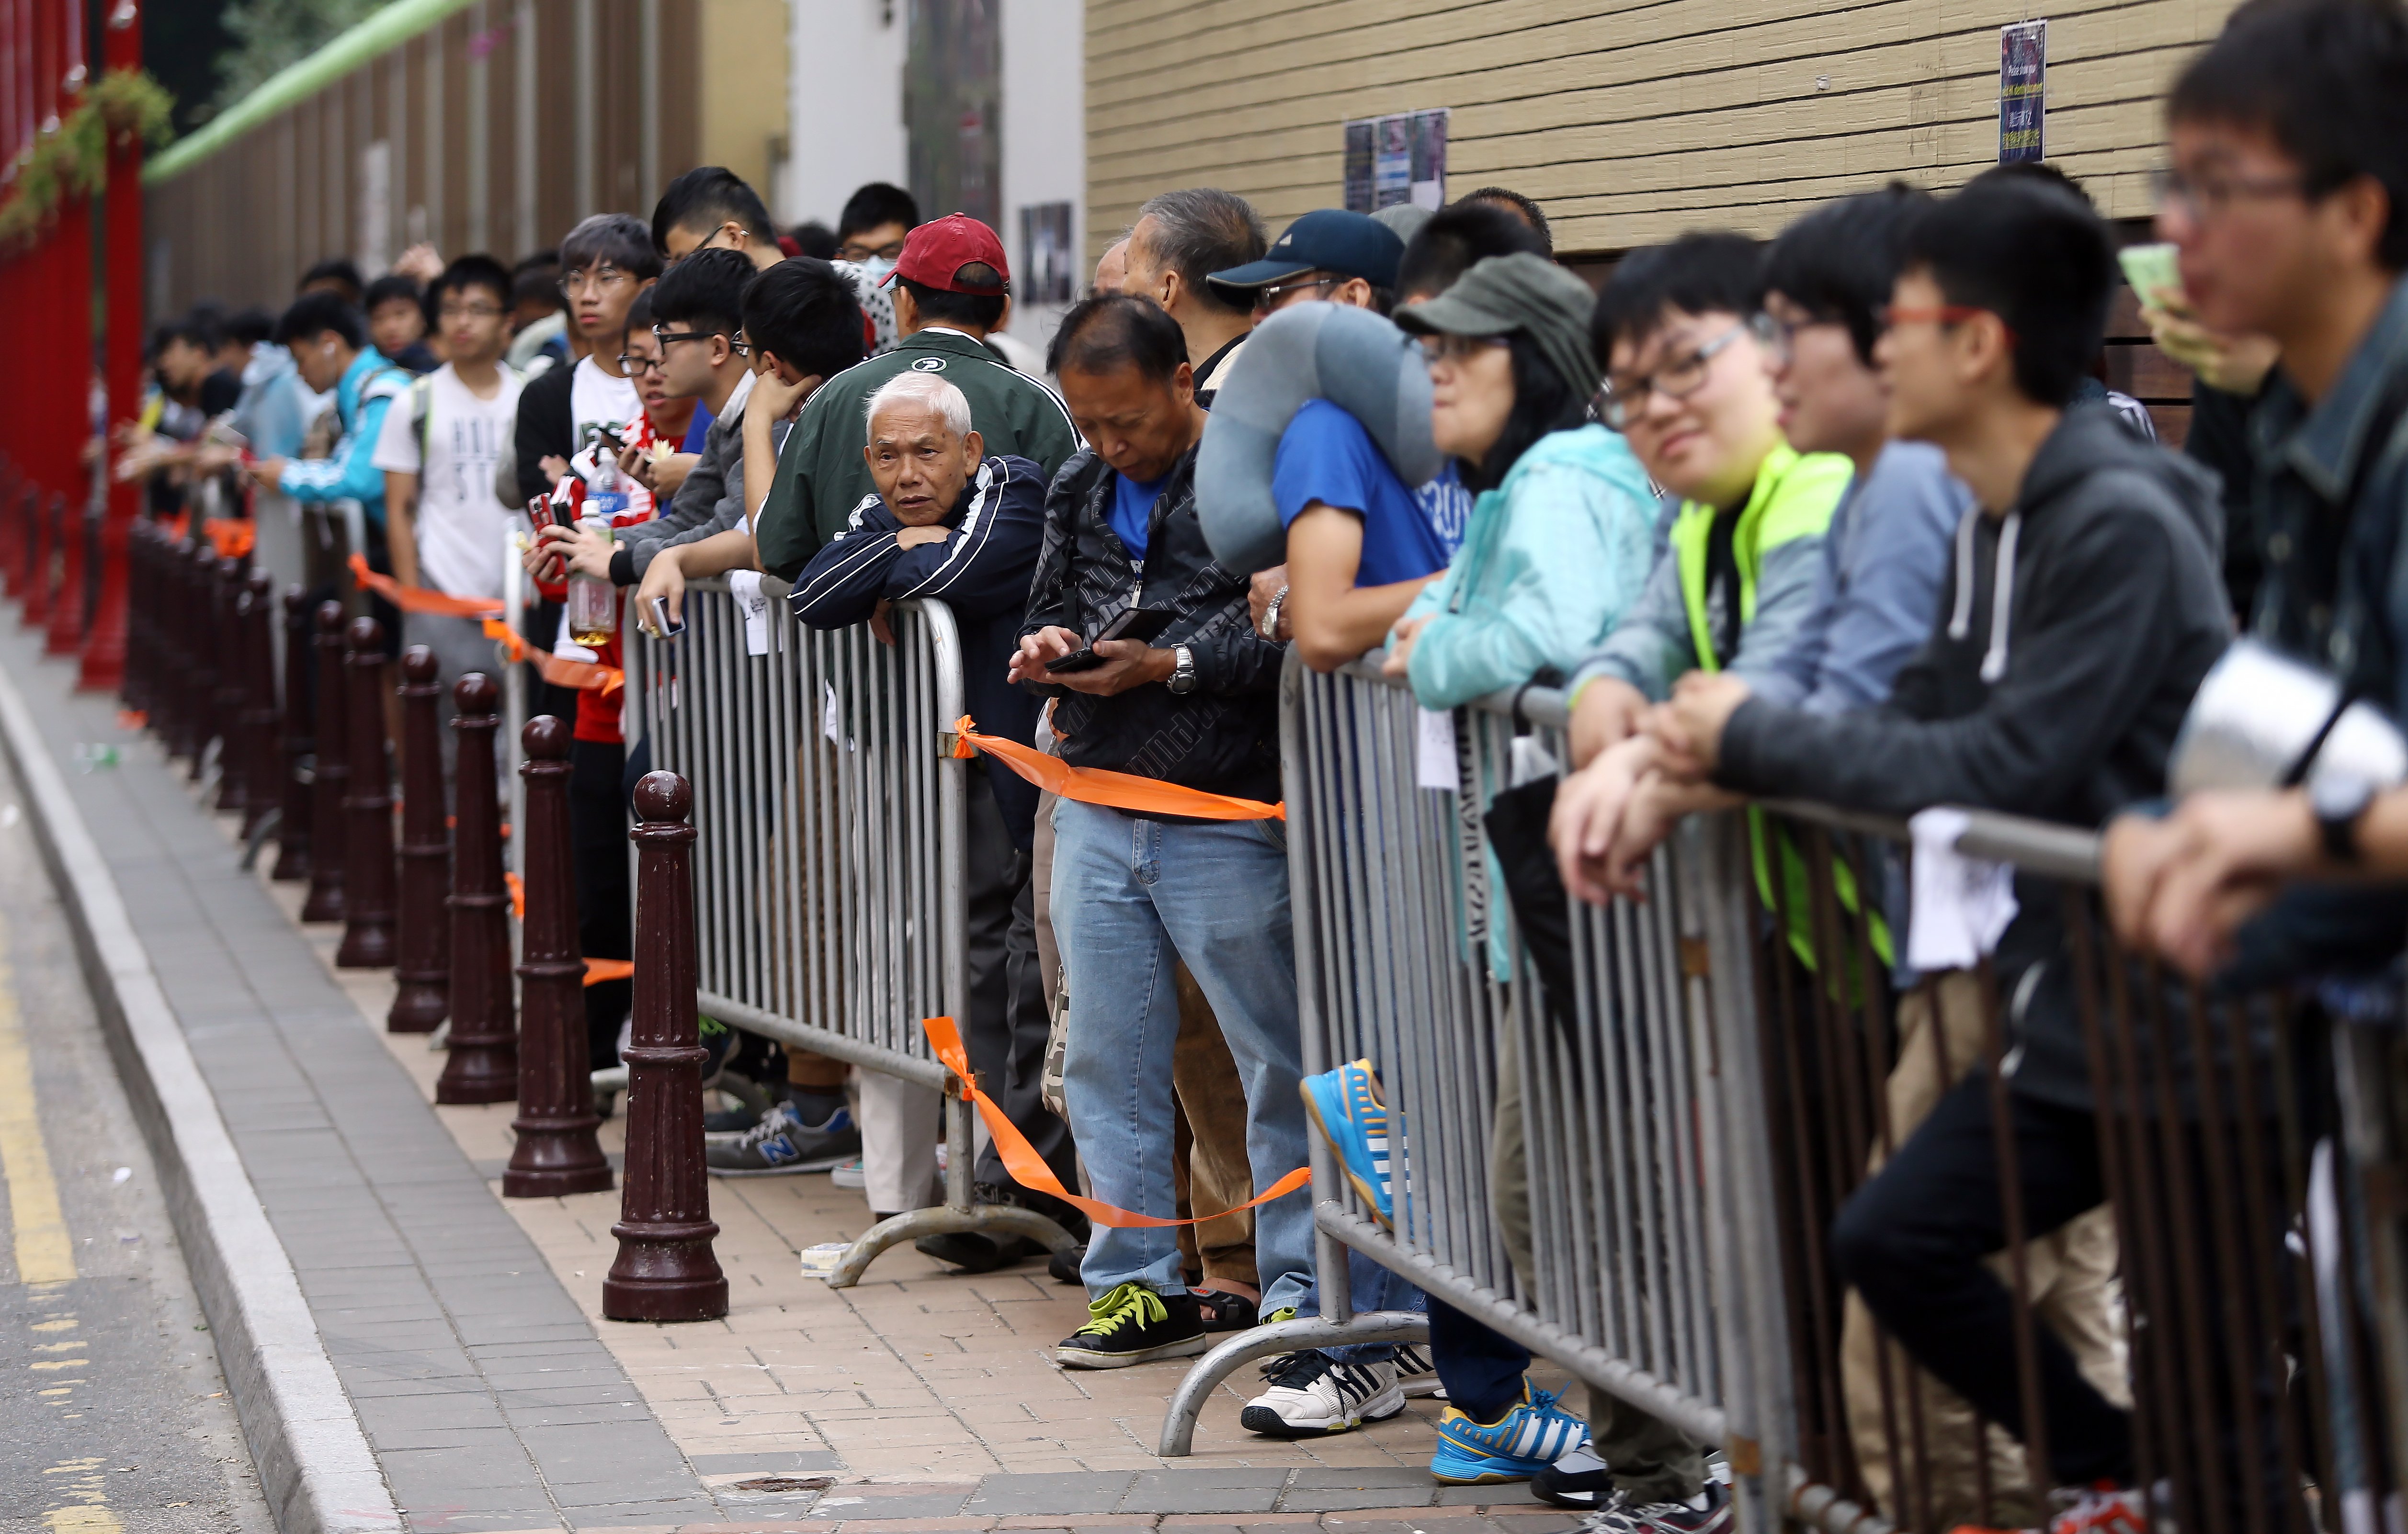 Hordes of football fans queued up for tickets for the Hong Kong versus China World Cup qualifier outside Mong Kok Stadium on November 4. Photo: Sam Tsang